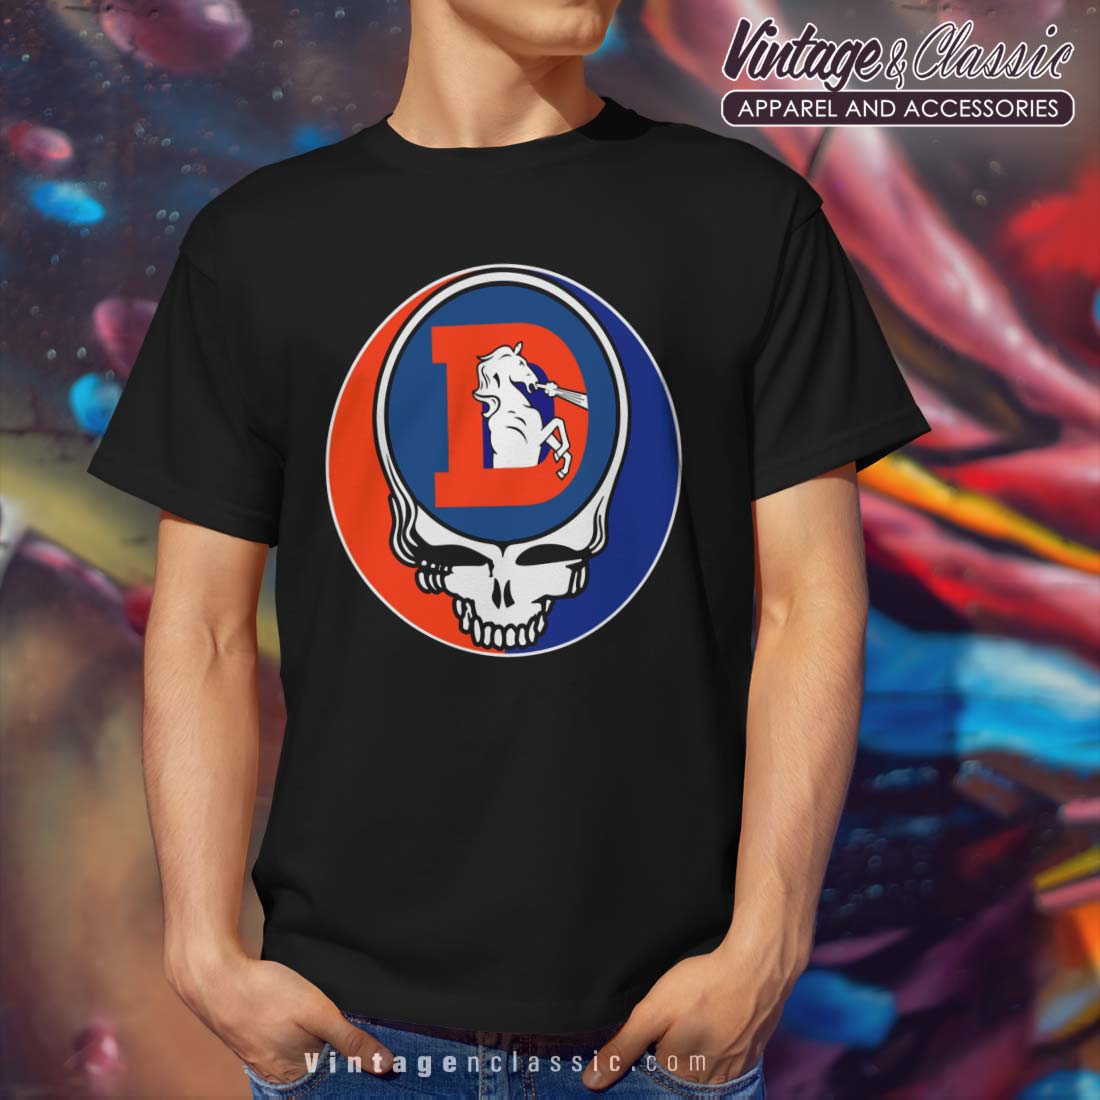 Grateful Dead - Chicago White Sox Steal Your Base T-Shirt - Small